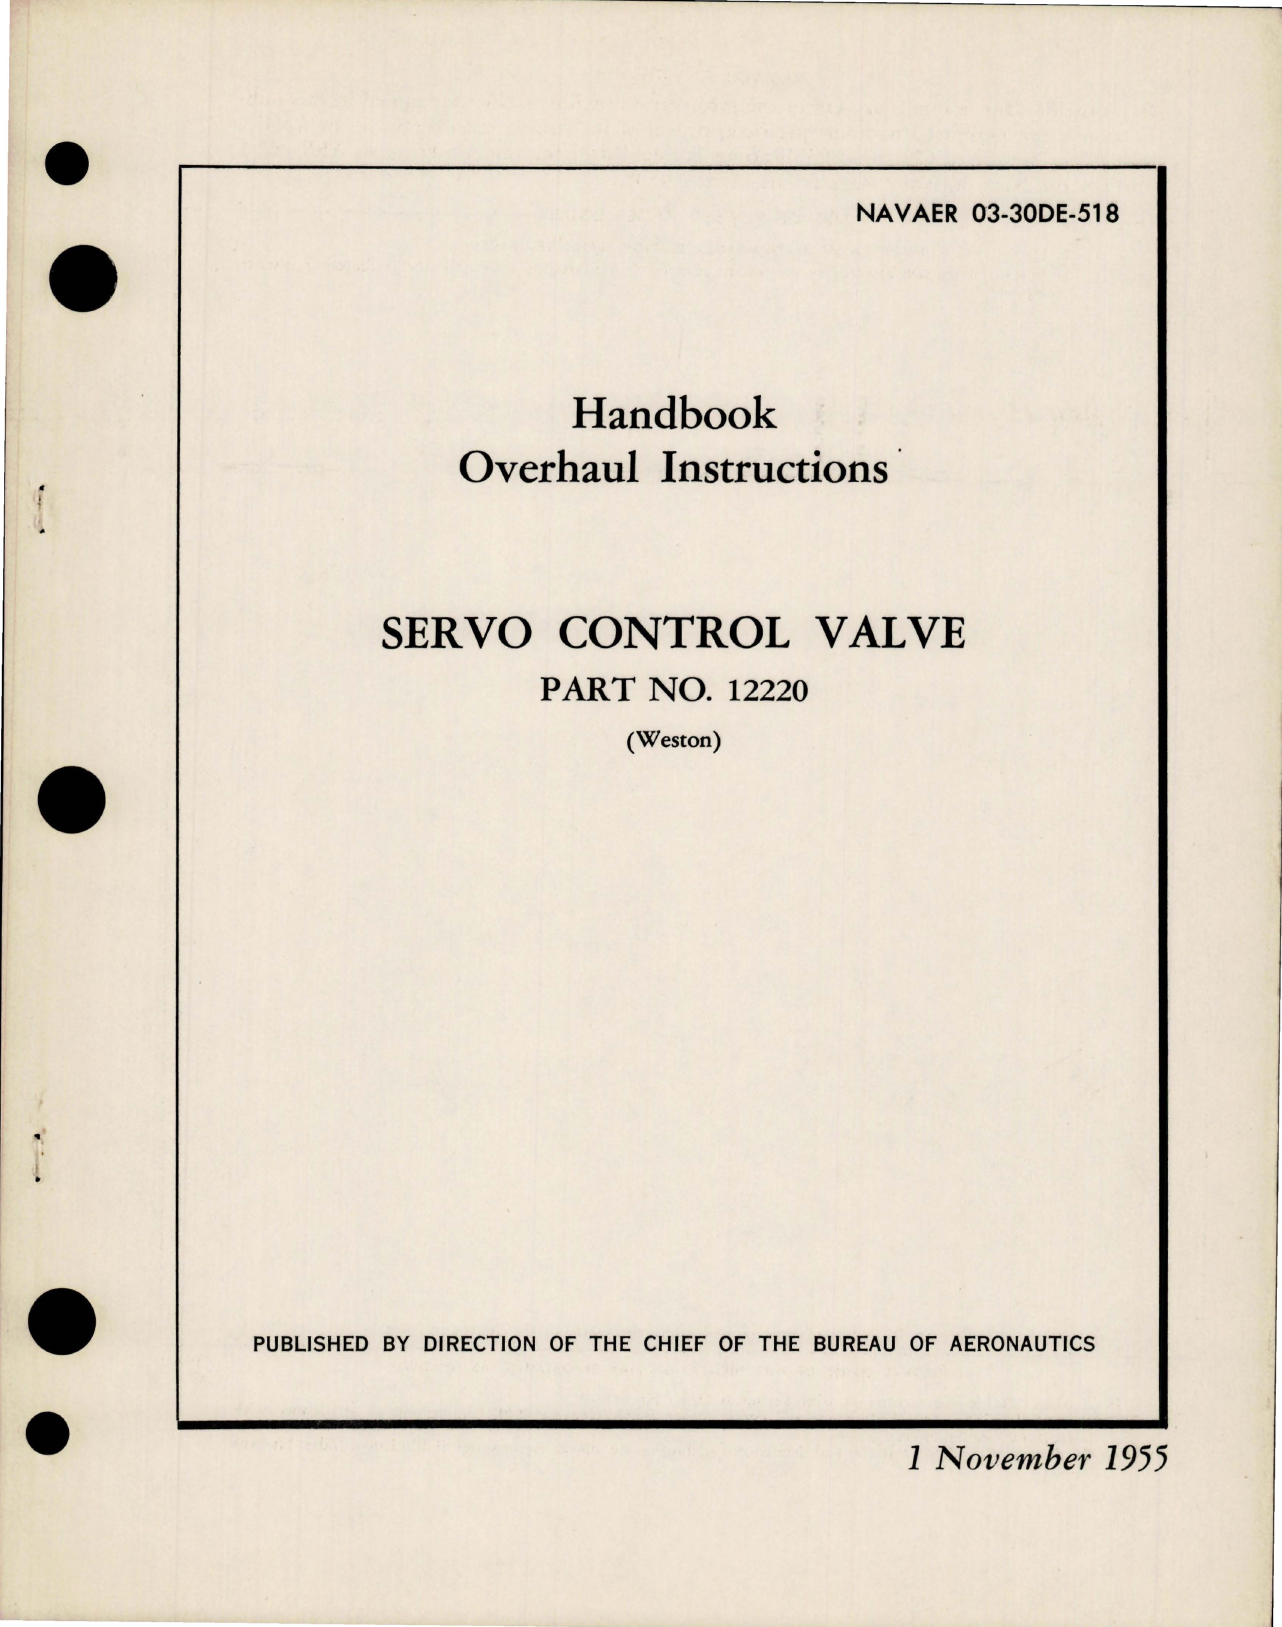 Sample page 1 from AirCorps Library document: Overhaul Instructions for Servo Control Valve - Part 12220 